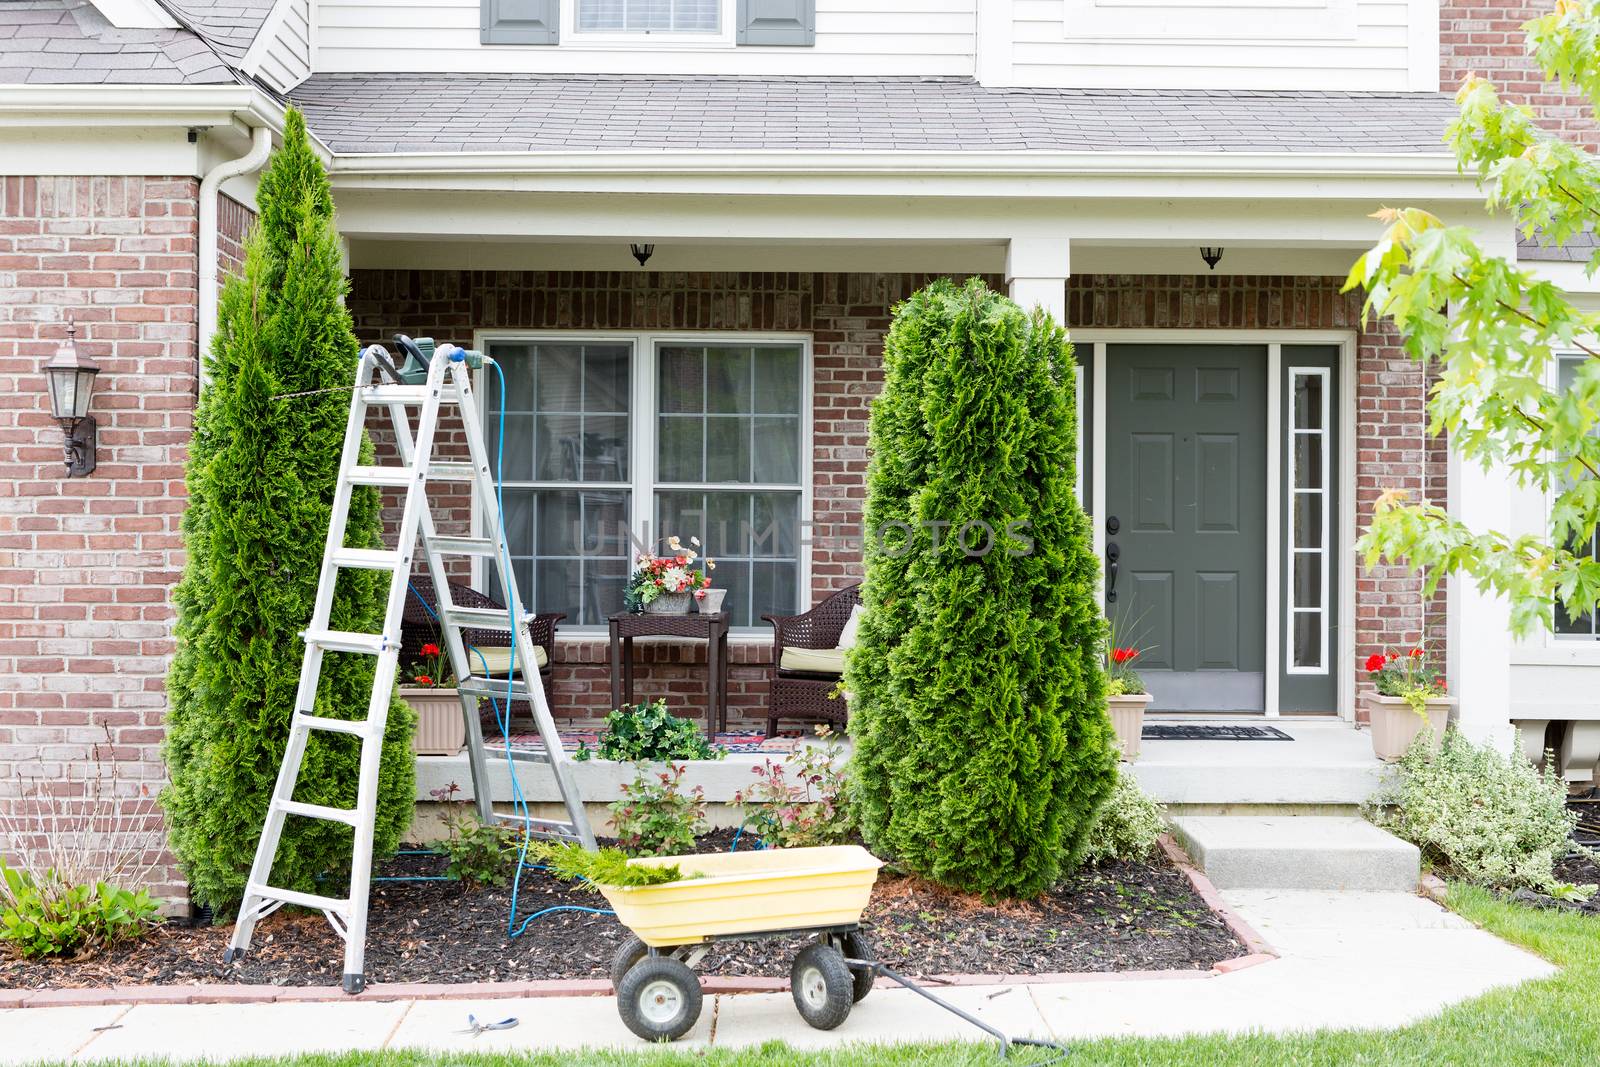 Springtime trimming of Arborvitae or ornamental evergreen Thuja trees growing in a flowerbed in front of a house using a stepladder, trimmer and small yellow cart to remove debris and foliage